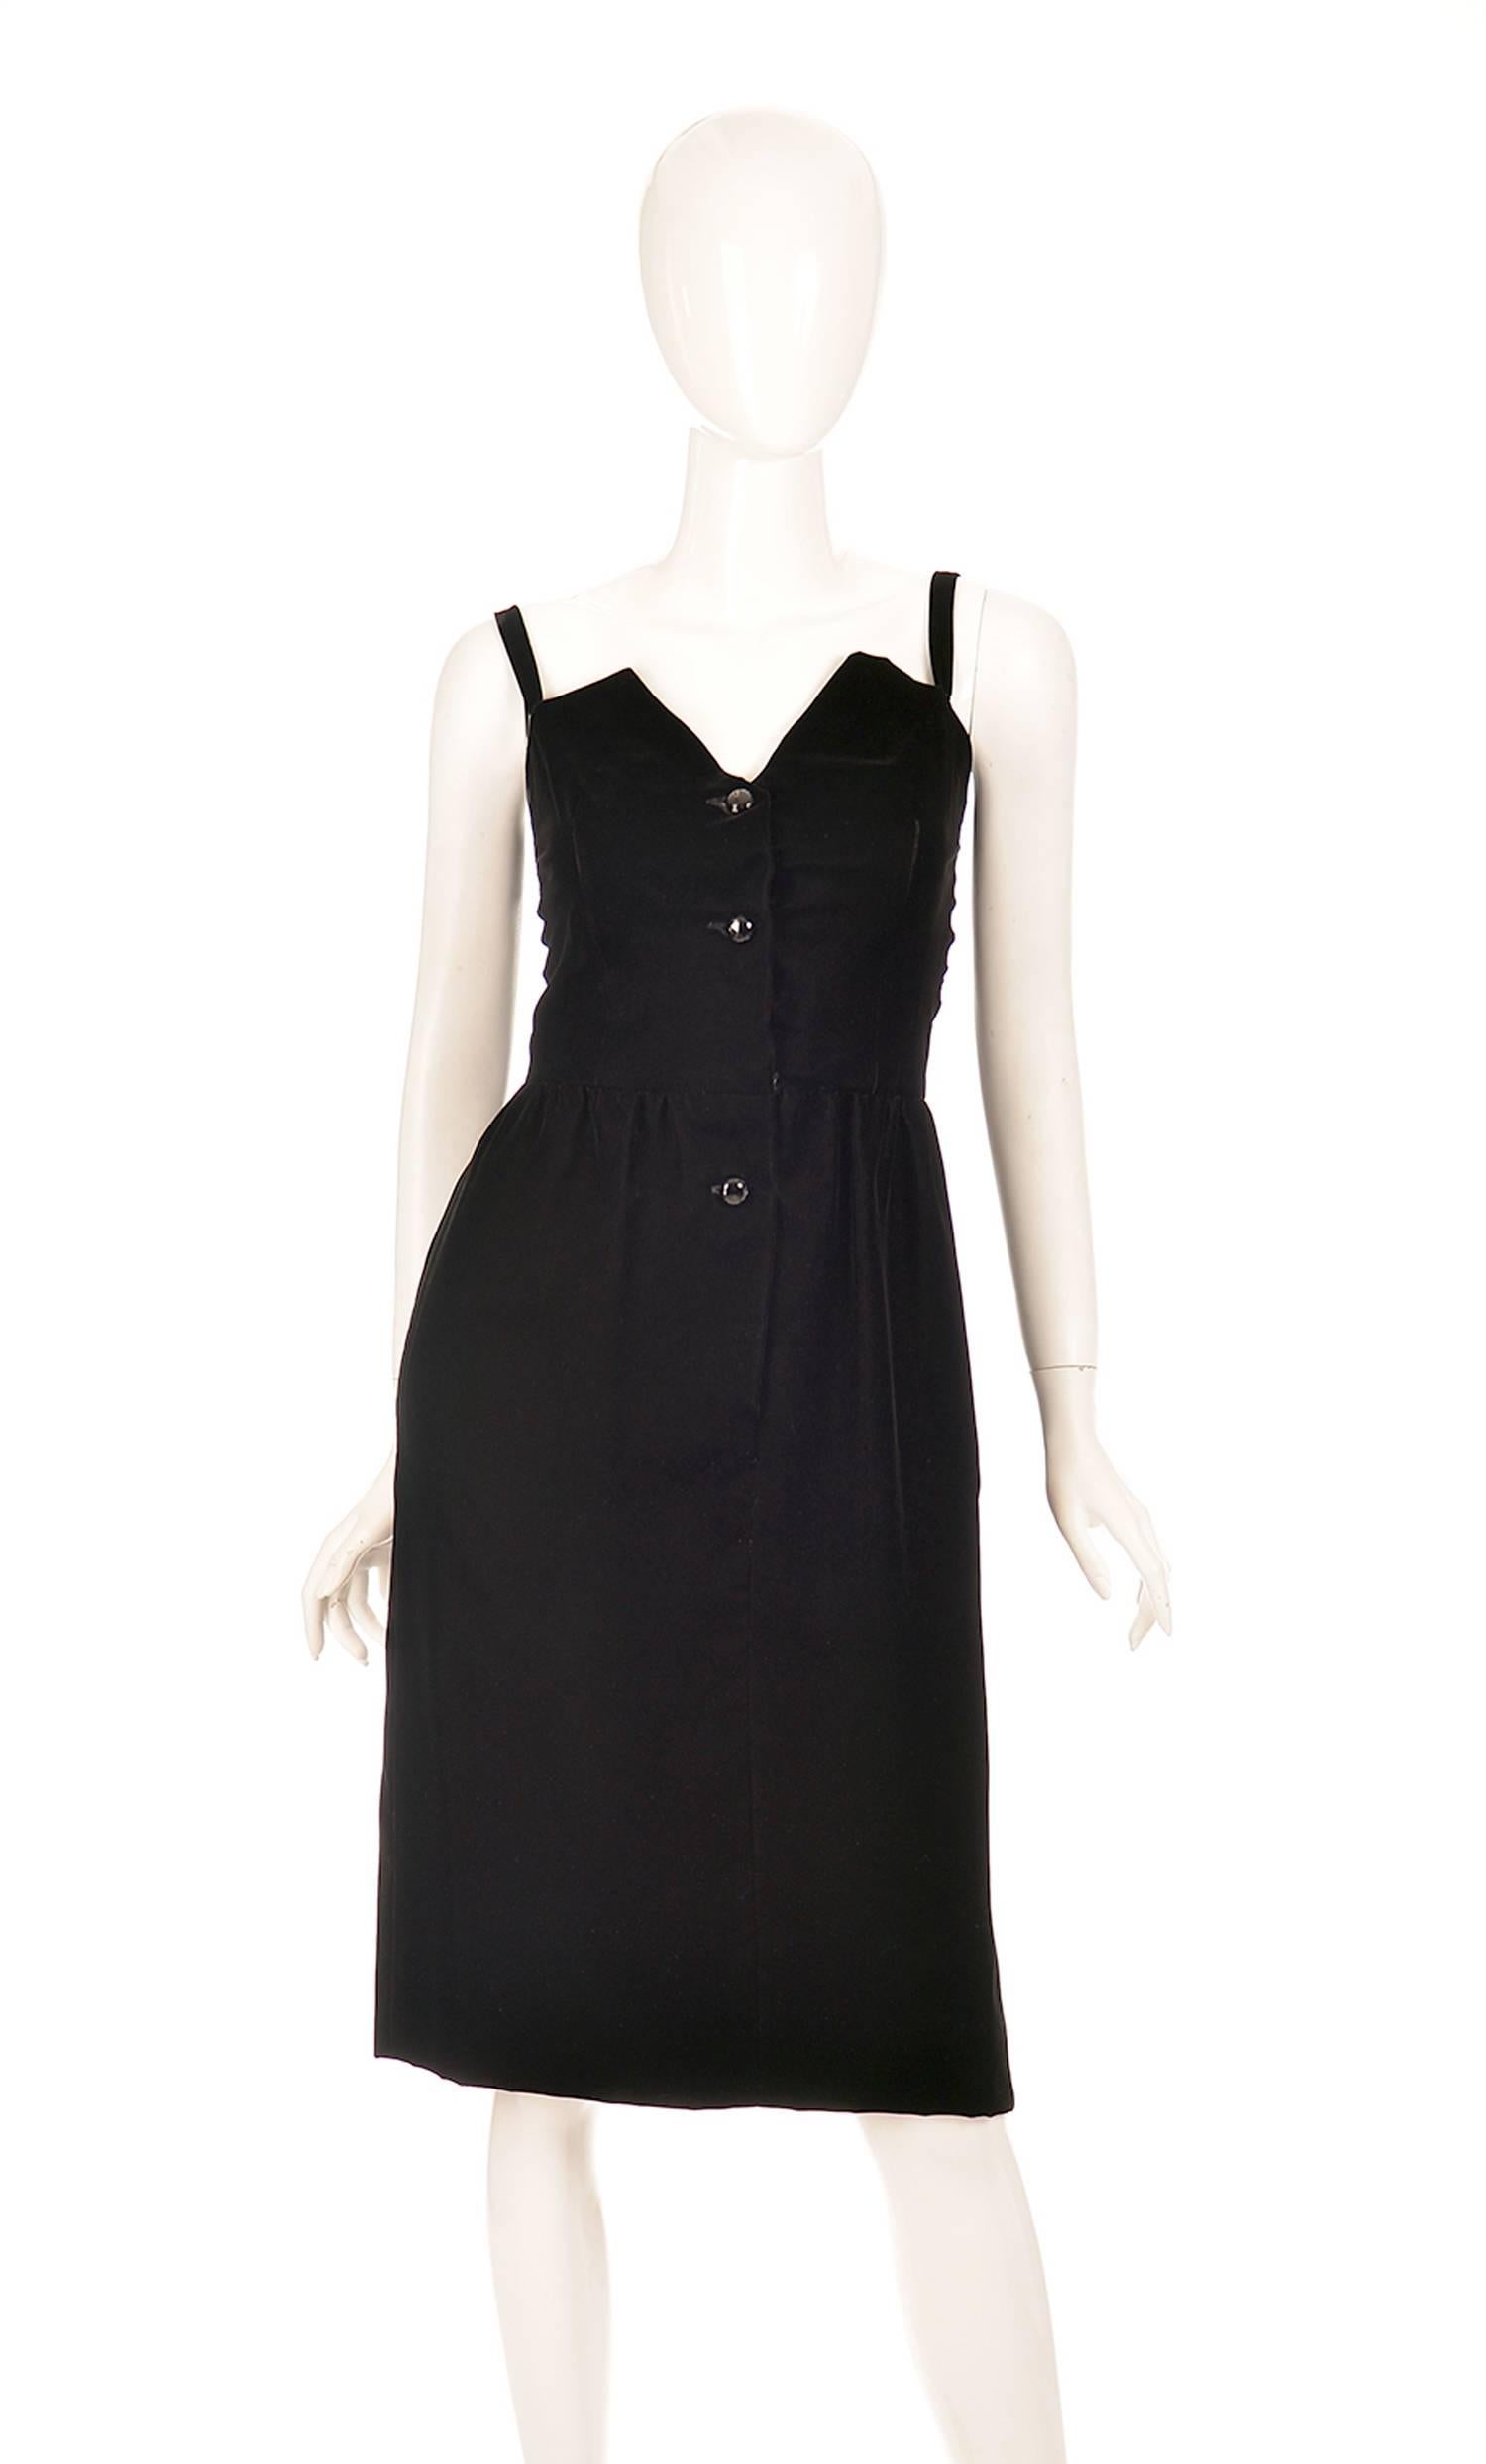 A 1970's Givenchy chic, black, velvet dress made of Viscos and Cupro. The dress features an angular geometric sweetheart neckline with spaghetti straps, buttoned up with polished geometric radial cut black buttons. This dress is knee length, and was